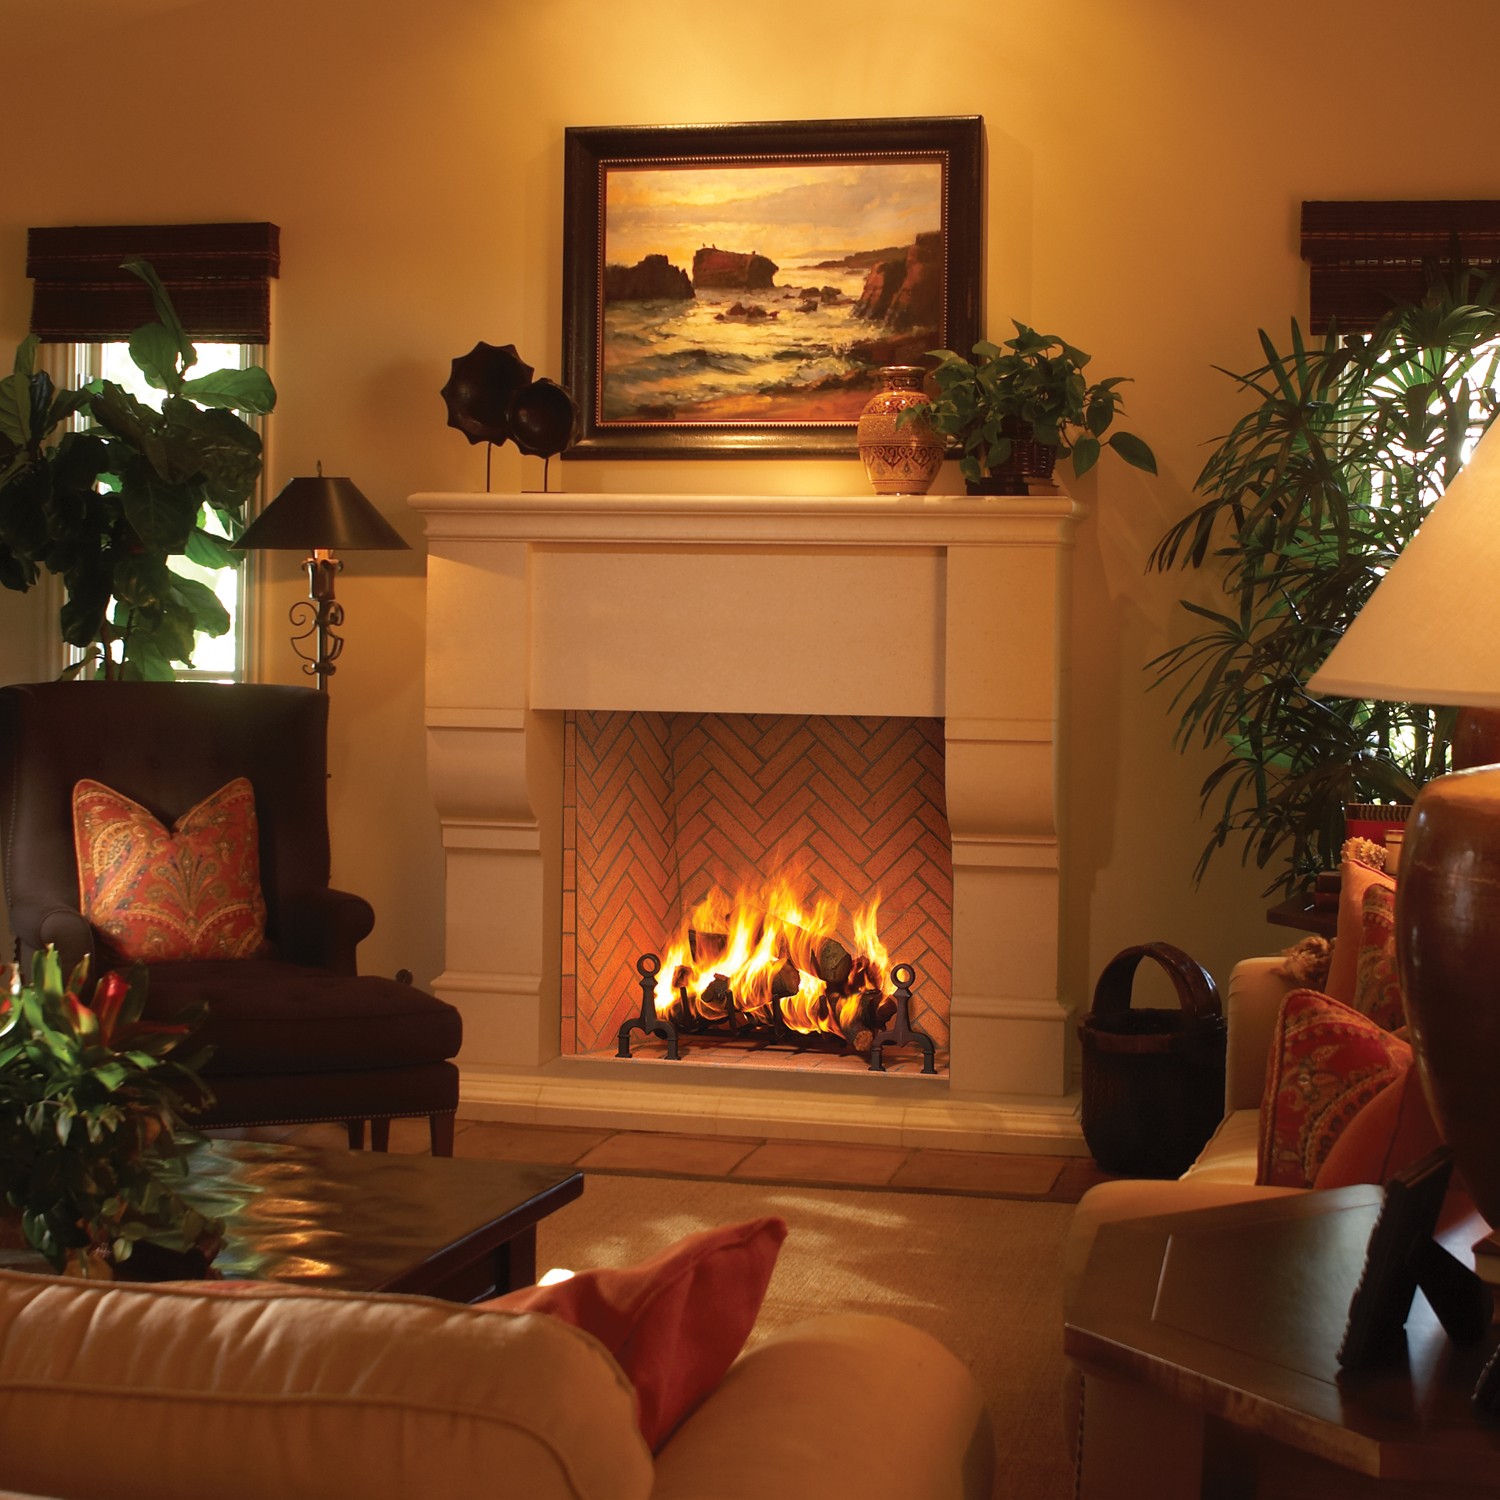 http://www.hearthandgrill.com/store/top-categories/woodburning-fireplaces/vf48h.html